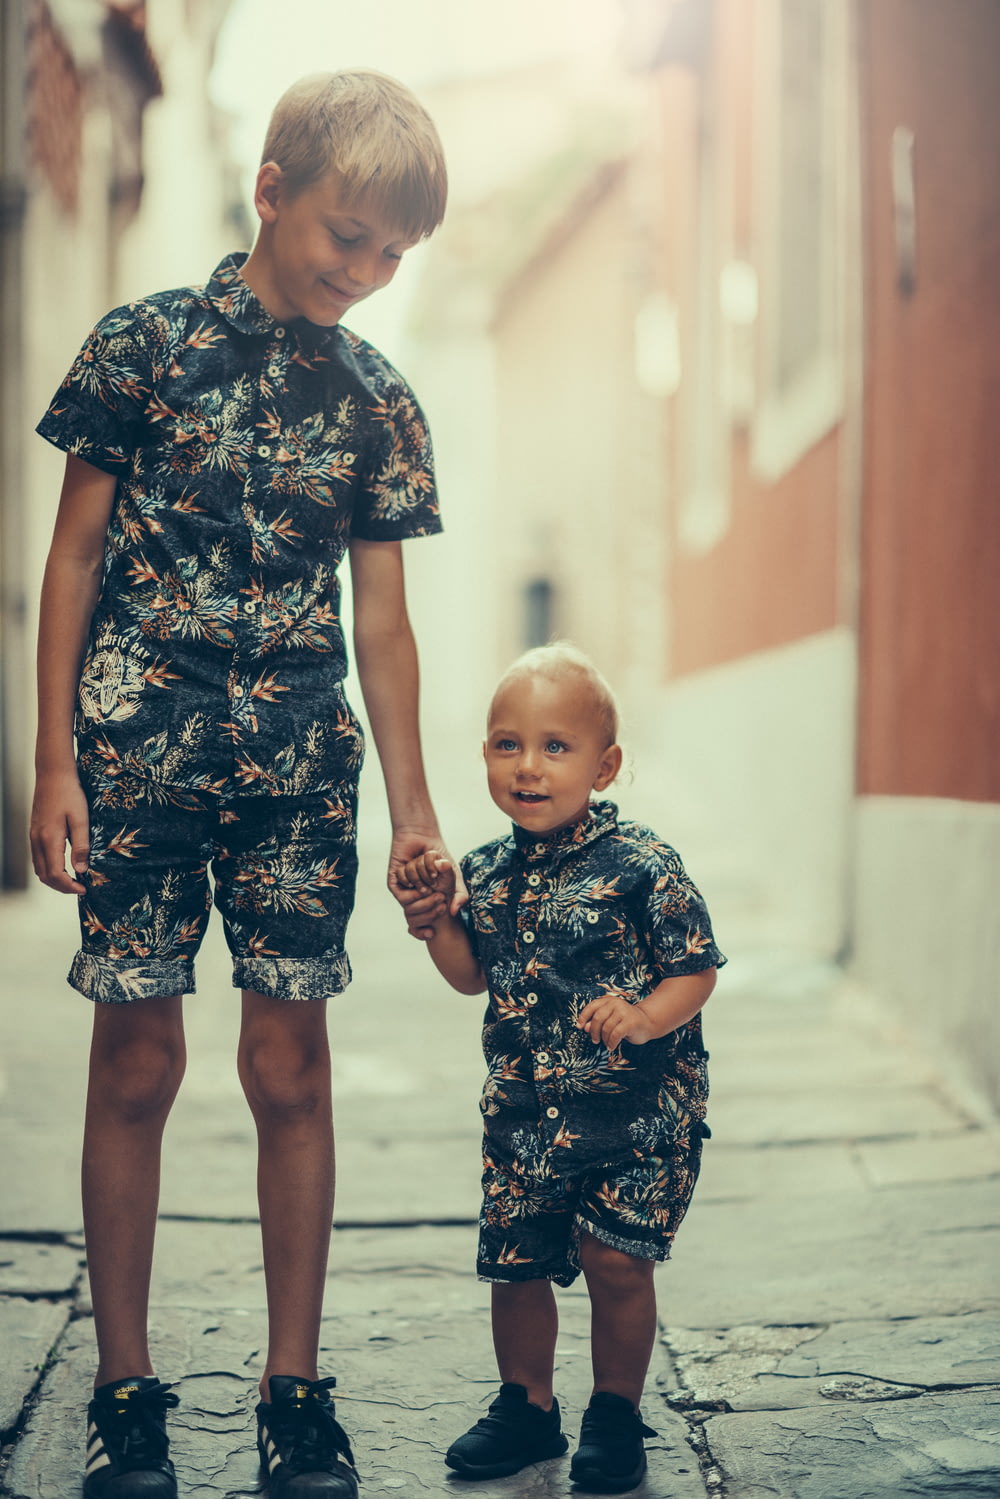 matching pair of boy's black and gray floral collared shirt and shorts standing on gray concrete area